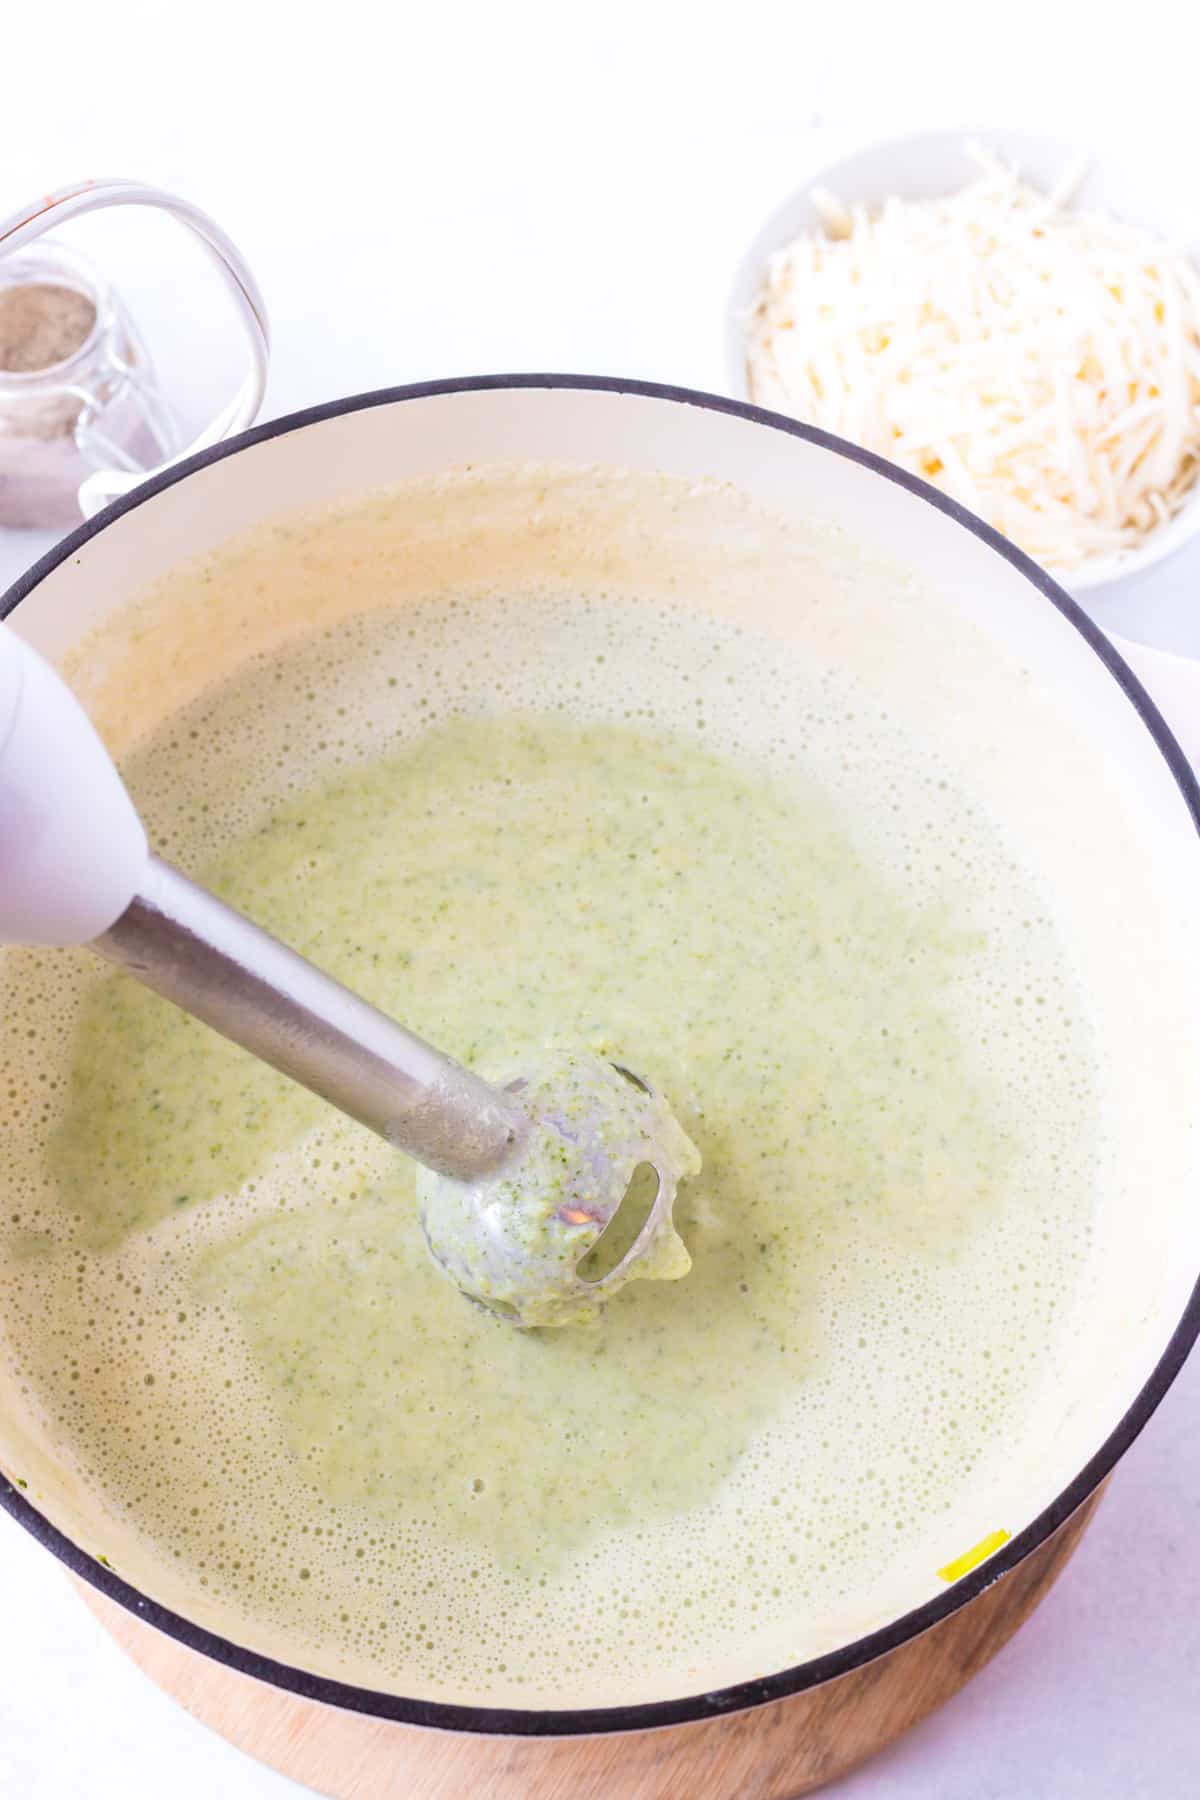 Immersion blender, blending the soup to a smooth texture